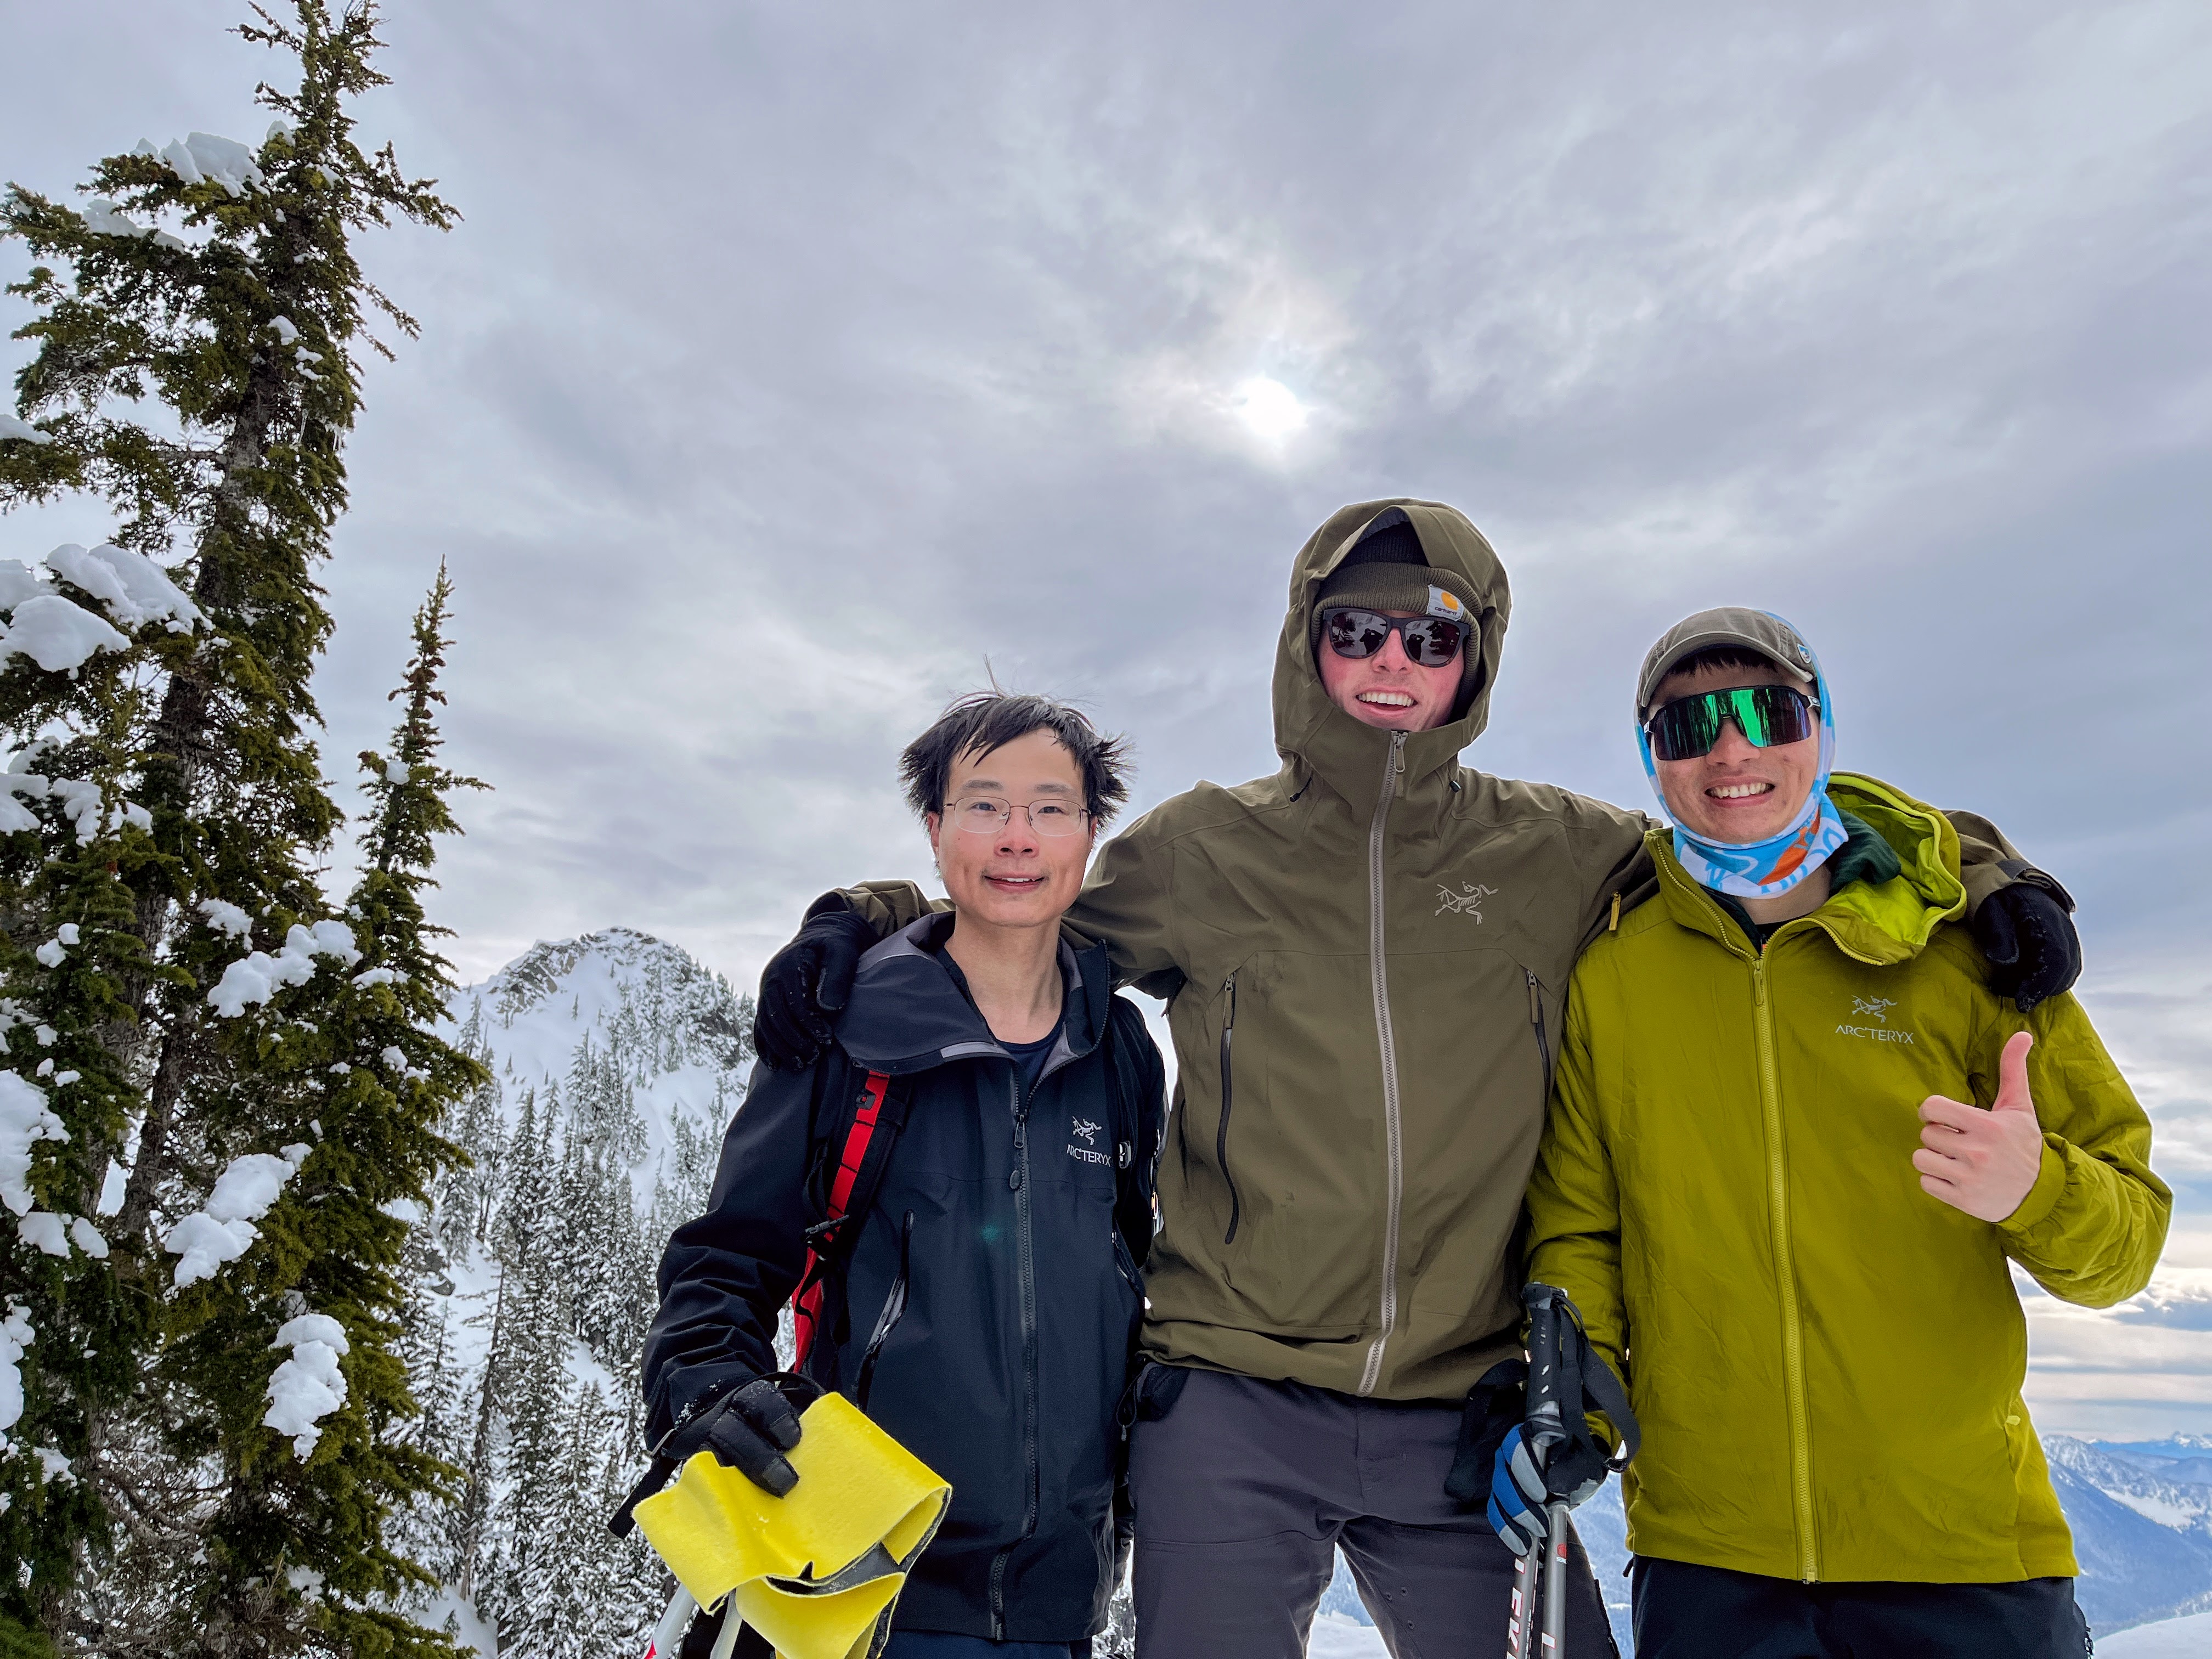 Beibin, Gus, and Chien-Yu at the top of Pineapple Pass